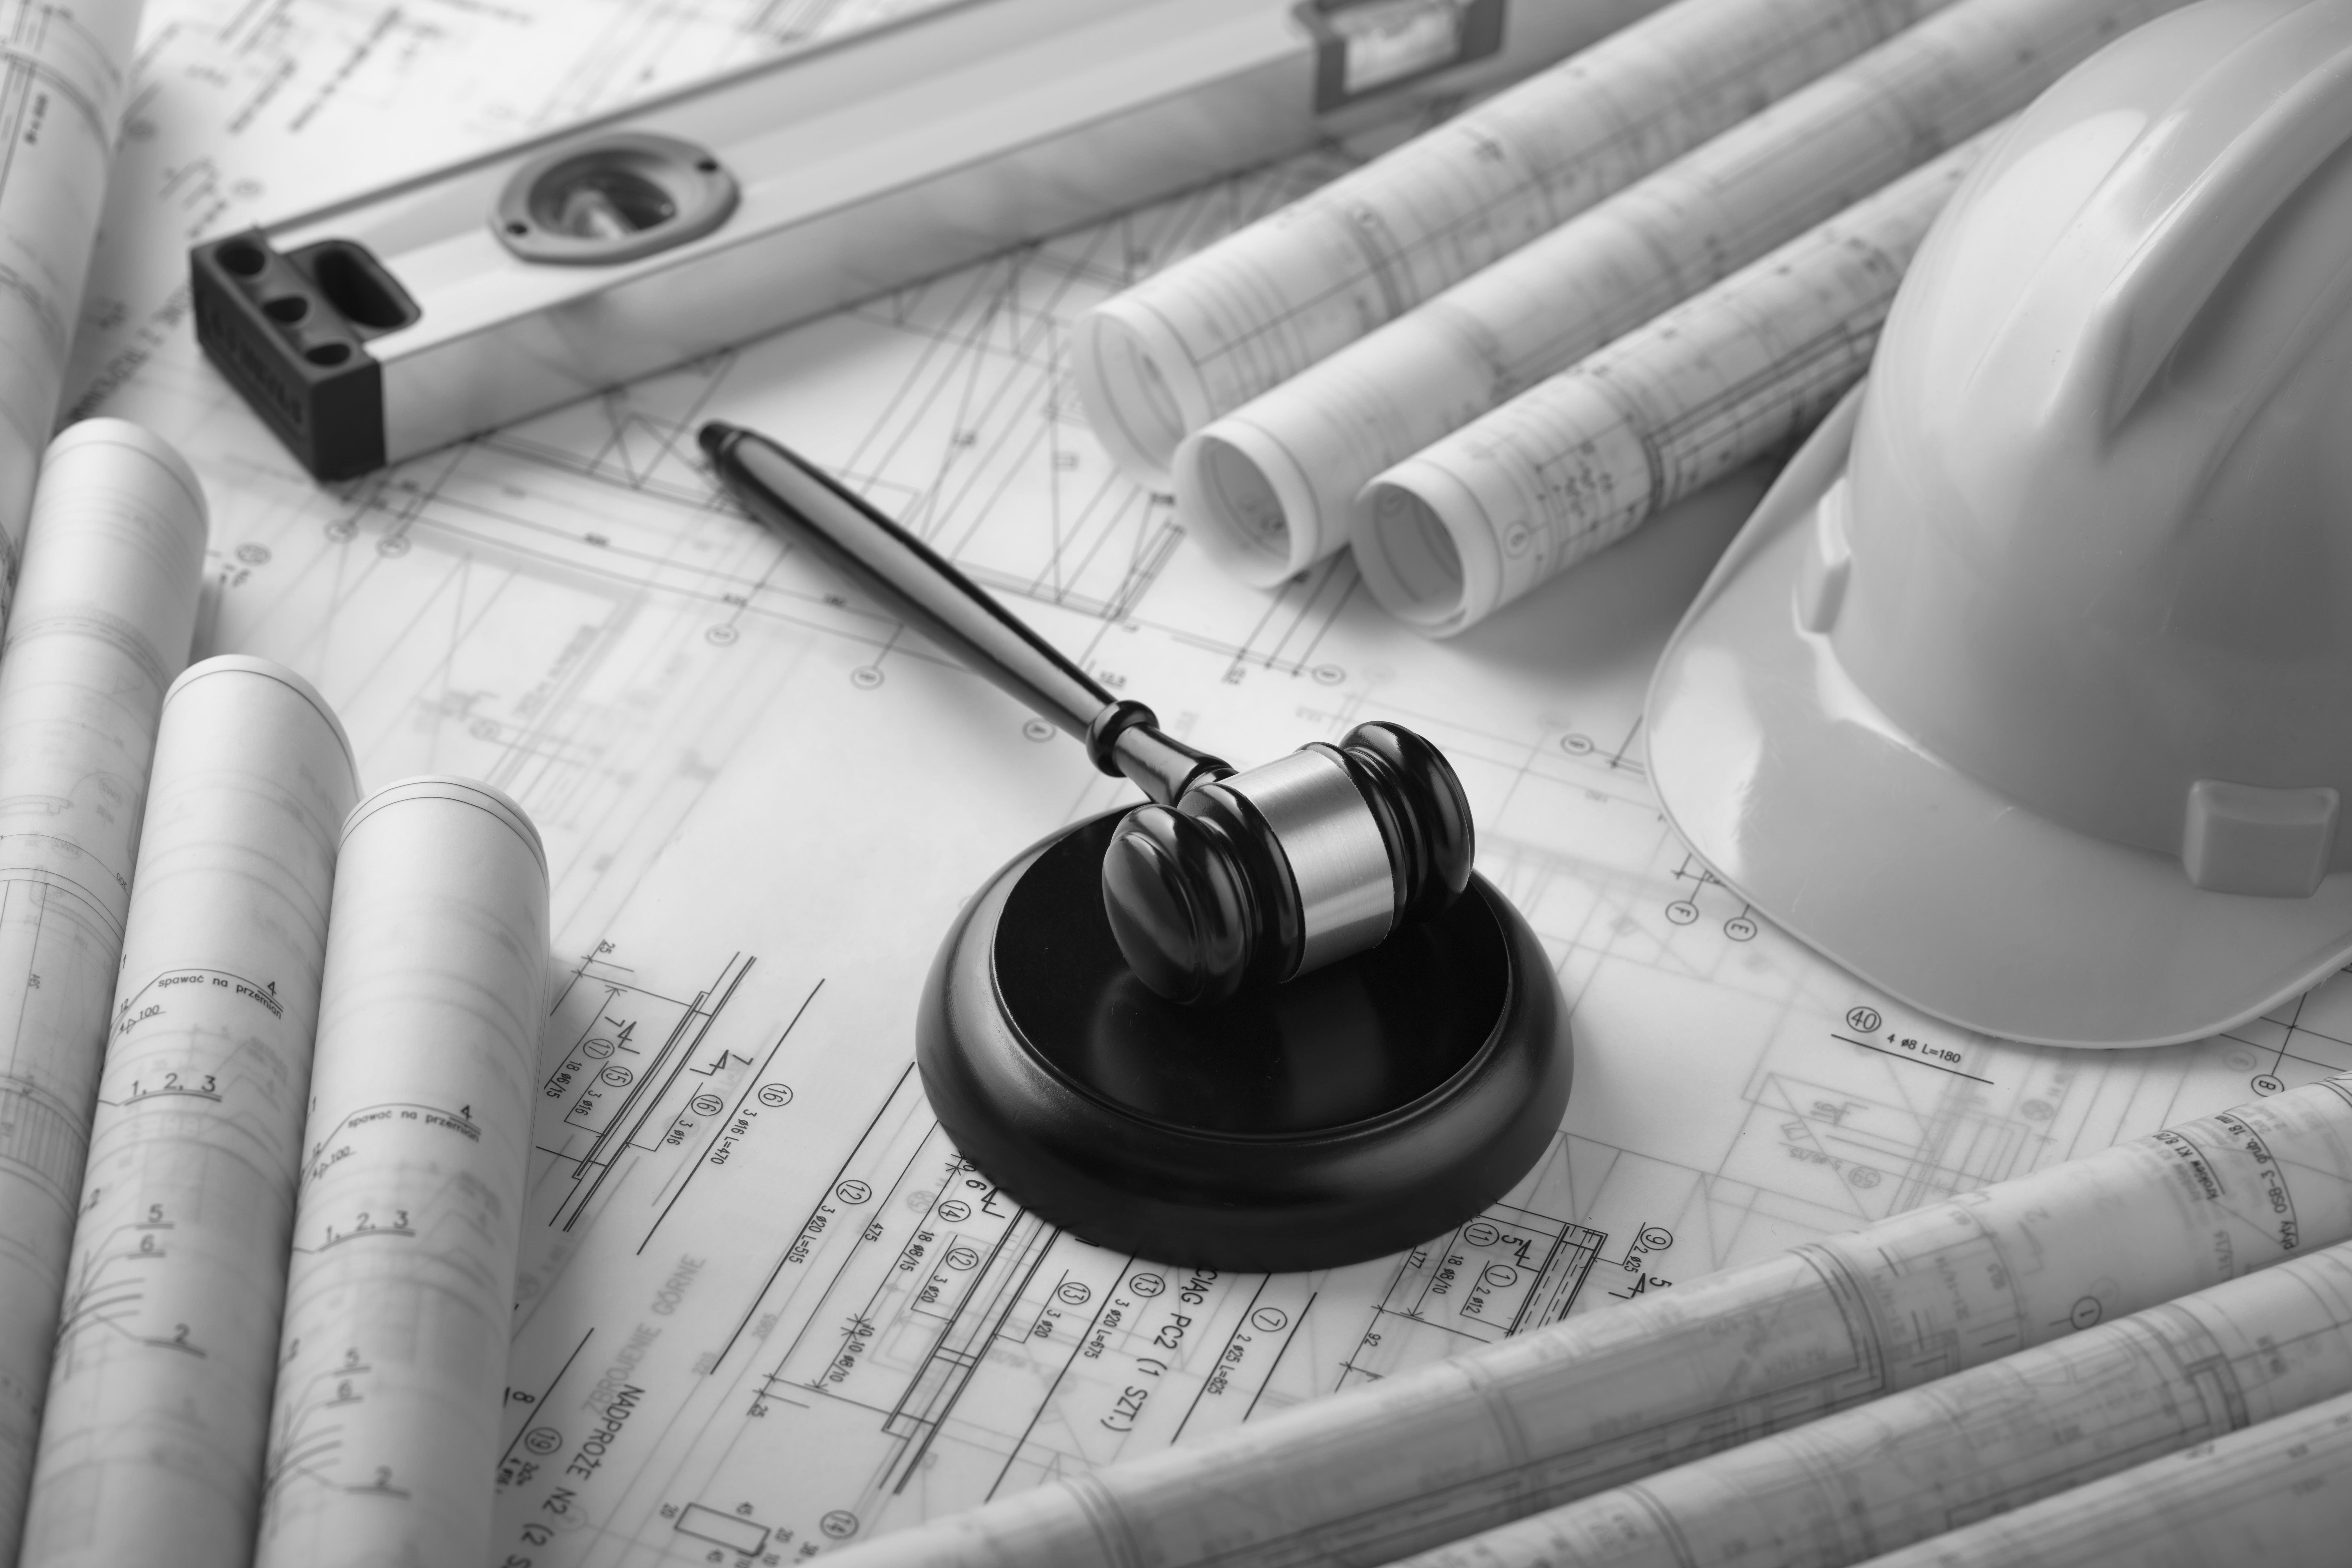 A gavel placed on top of construction plans